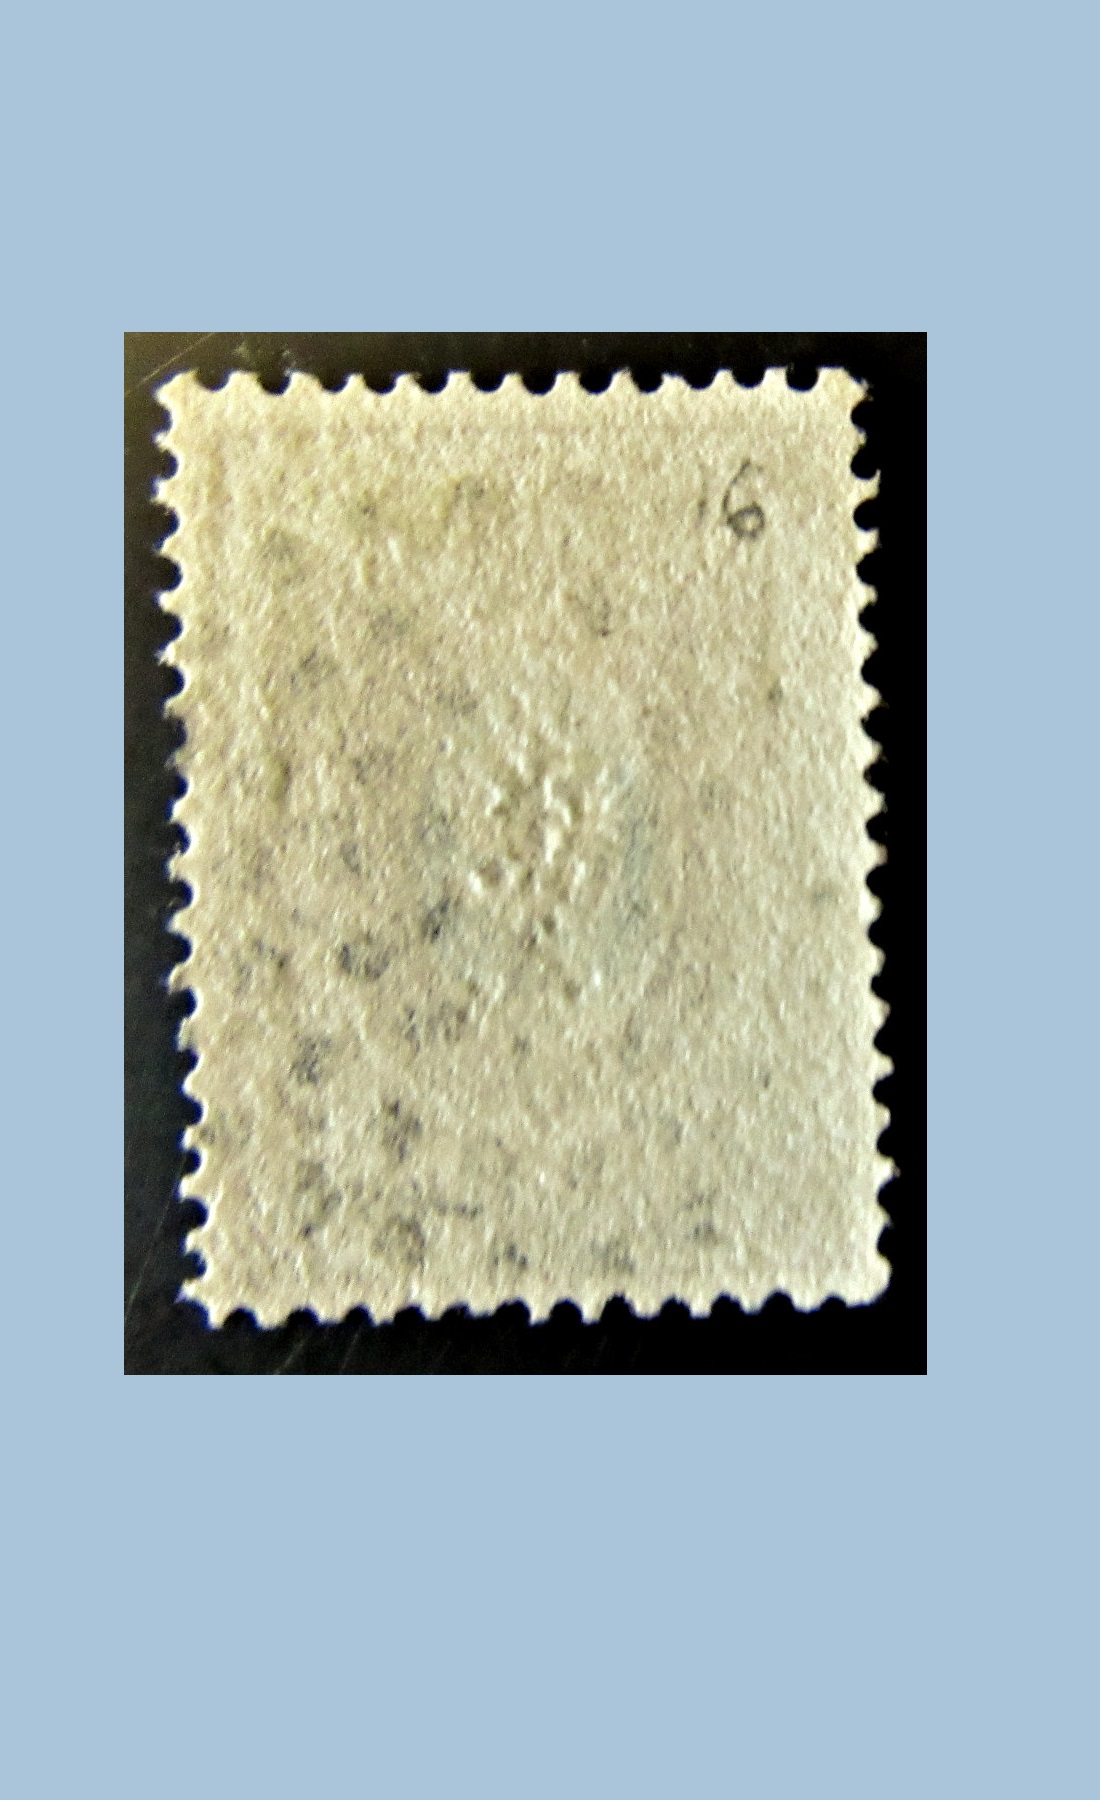 Rare Genuine Russian Postage Stamp from 1858